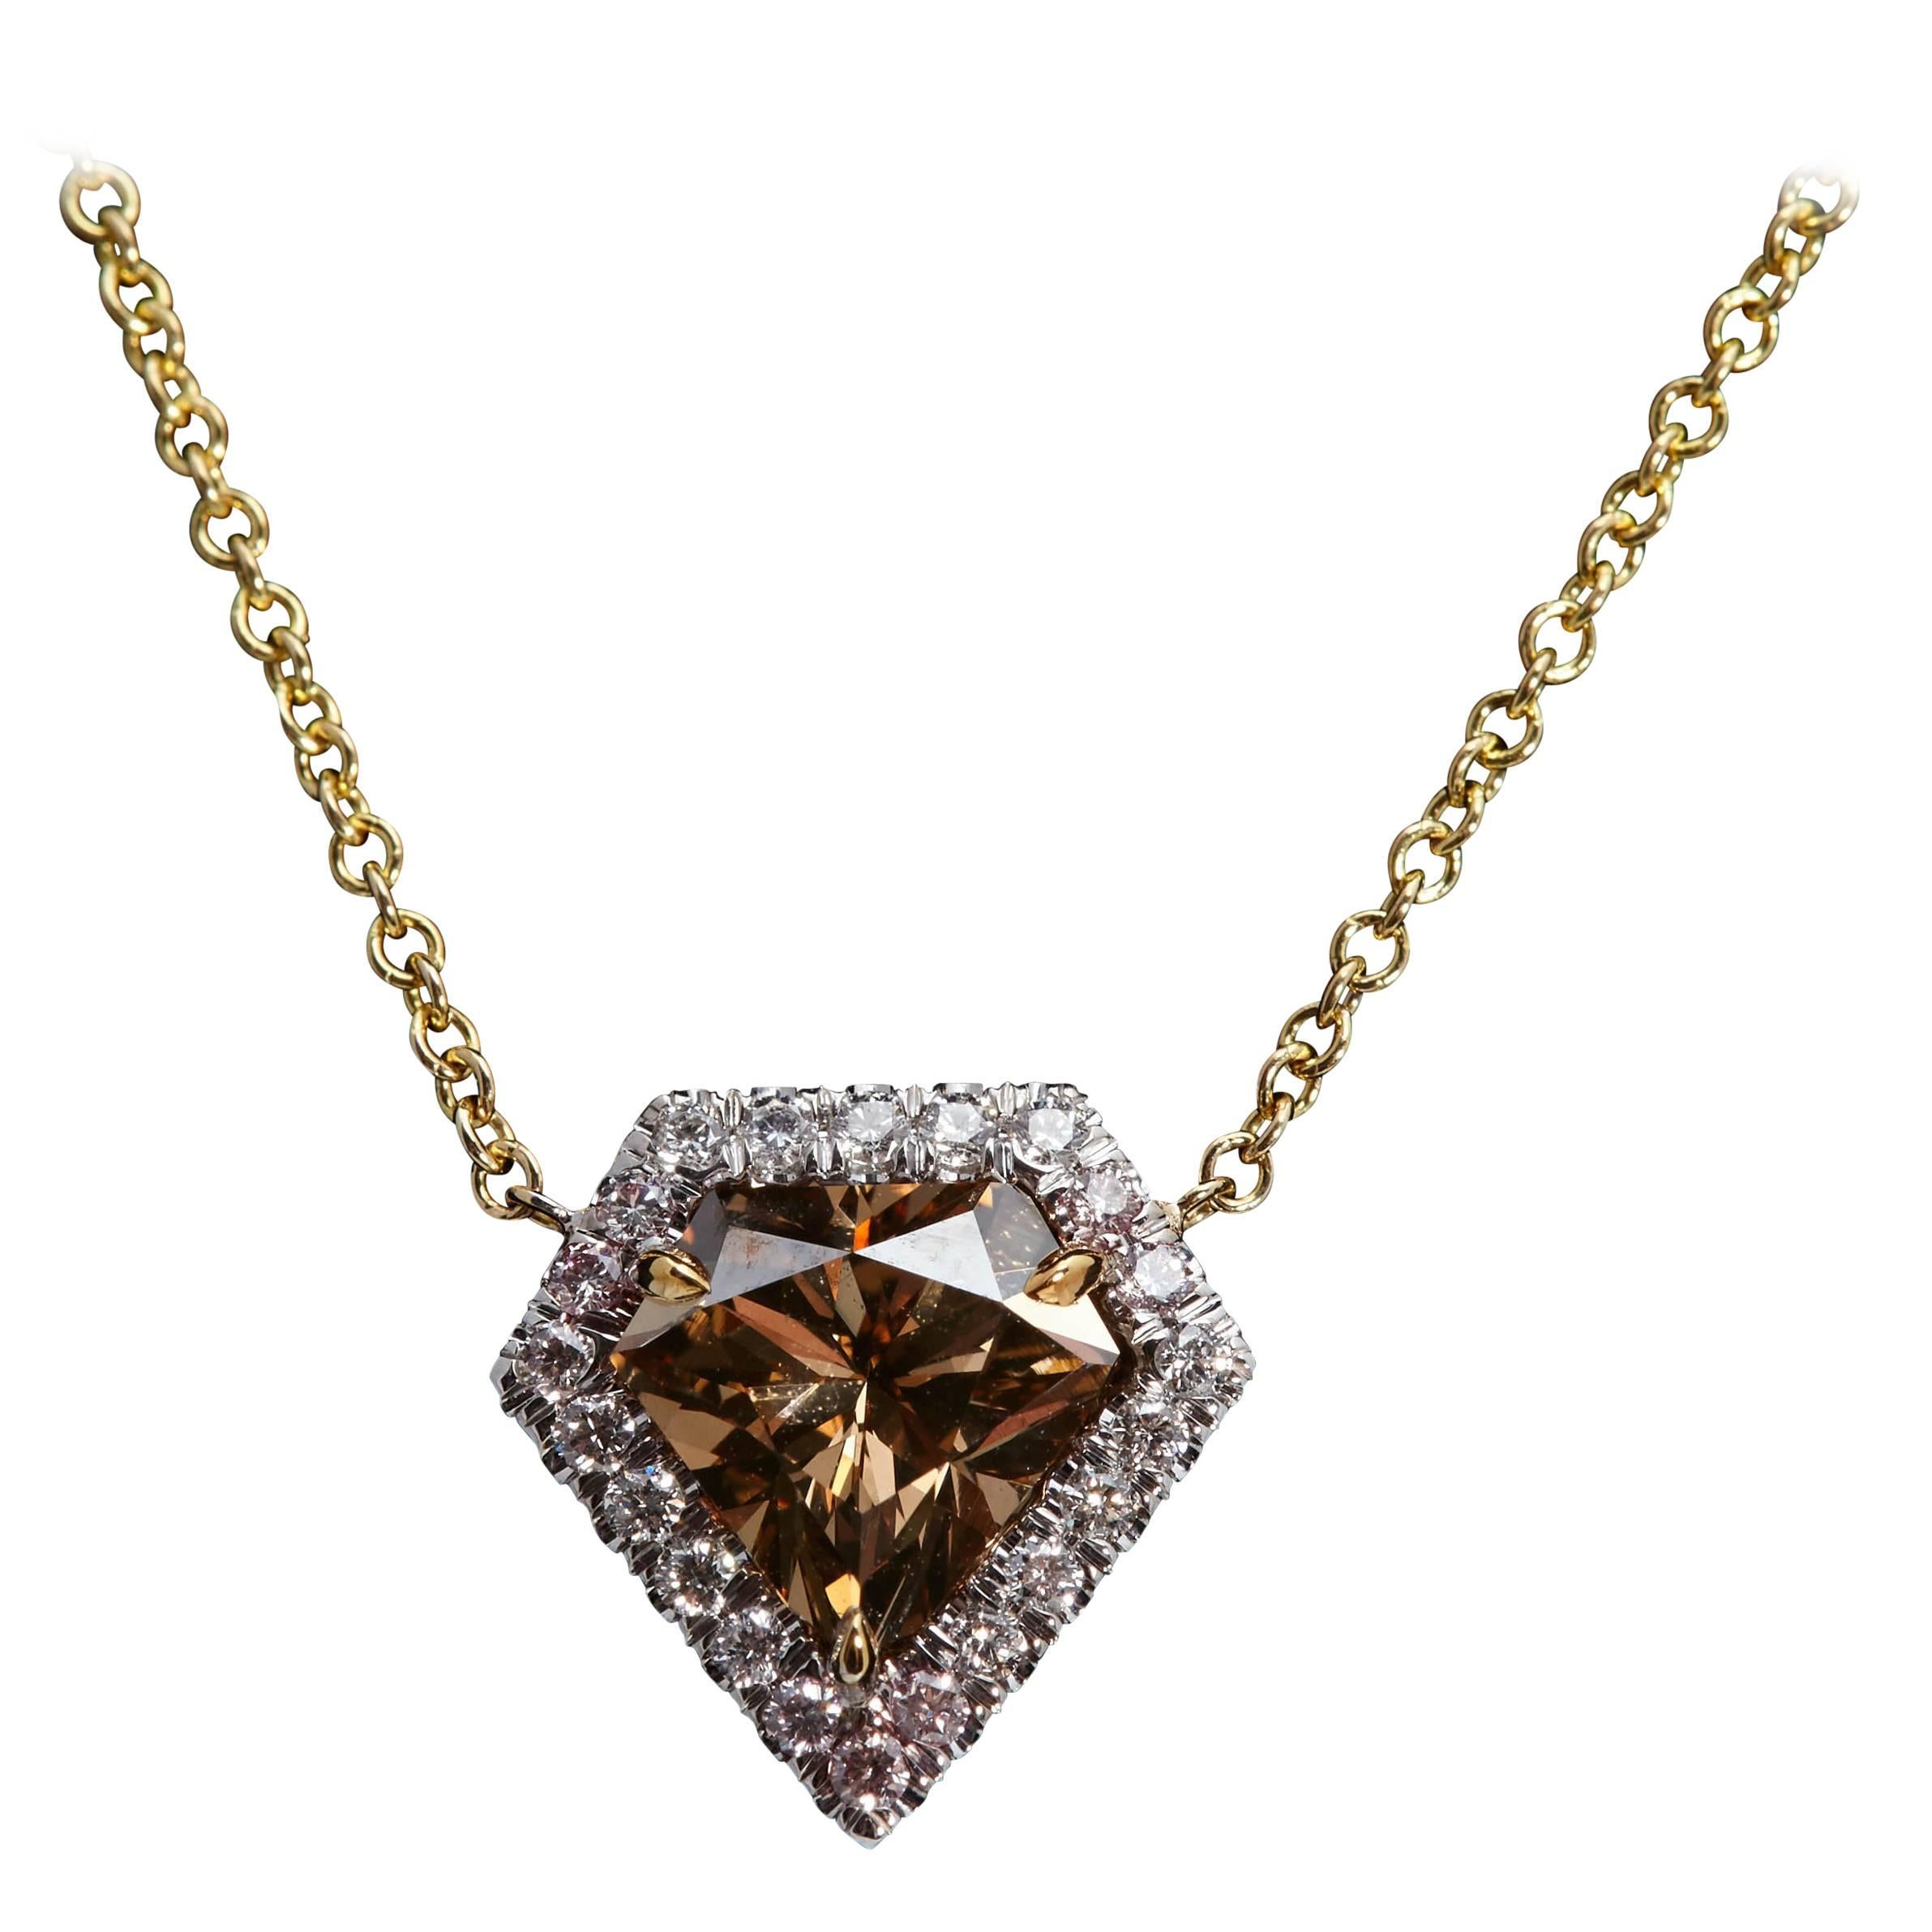 Shield Shaped Diamond 1.45 Carat GIA Natural Fancy Orange-Brown Gold Necklace For Sale